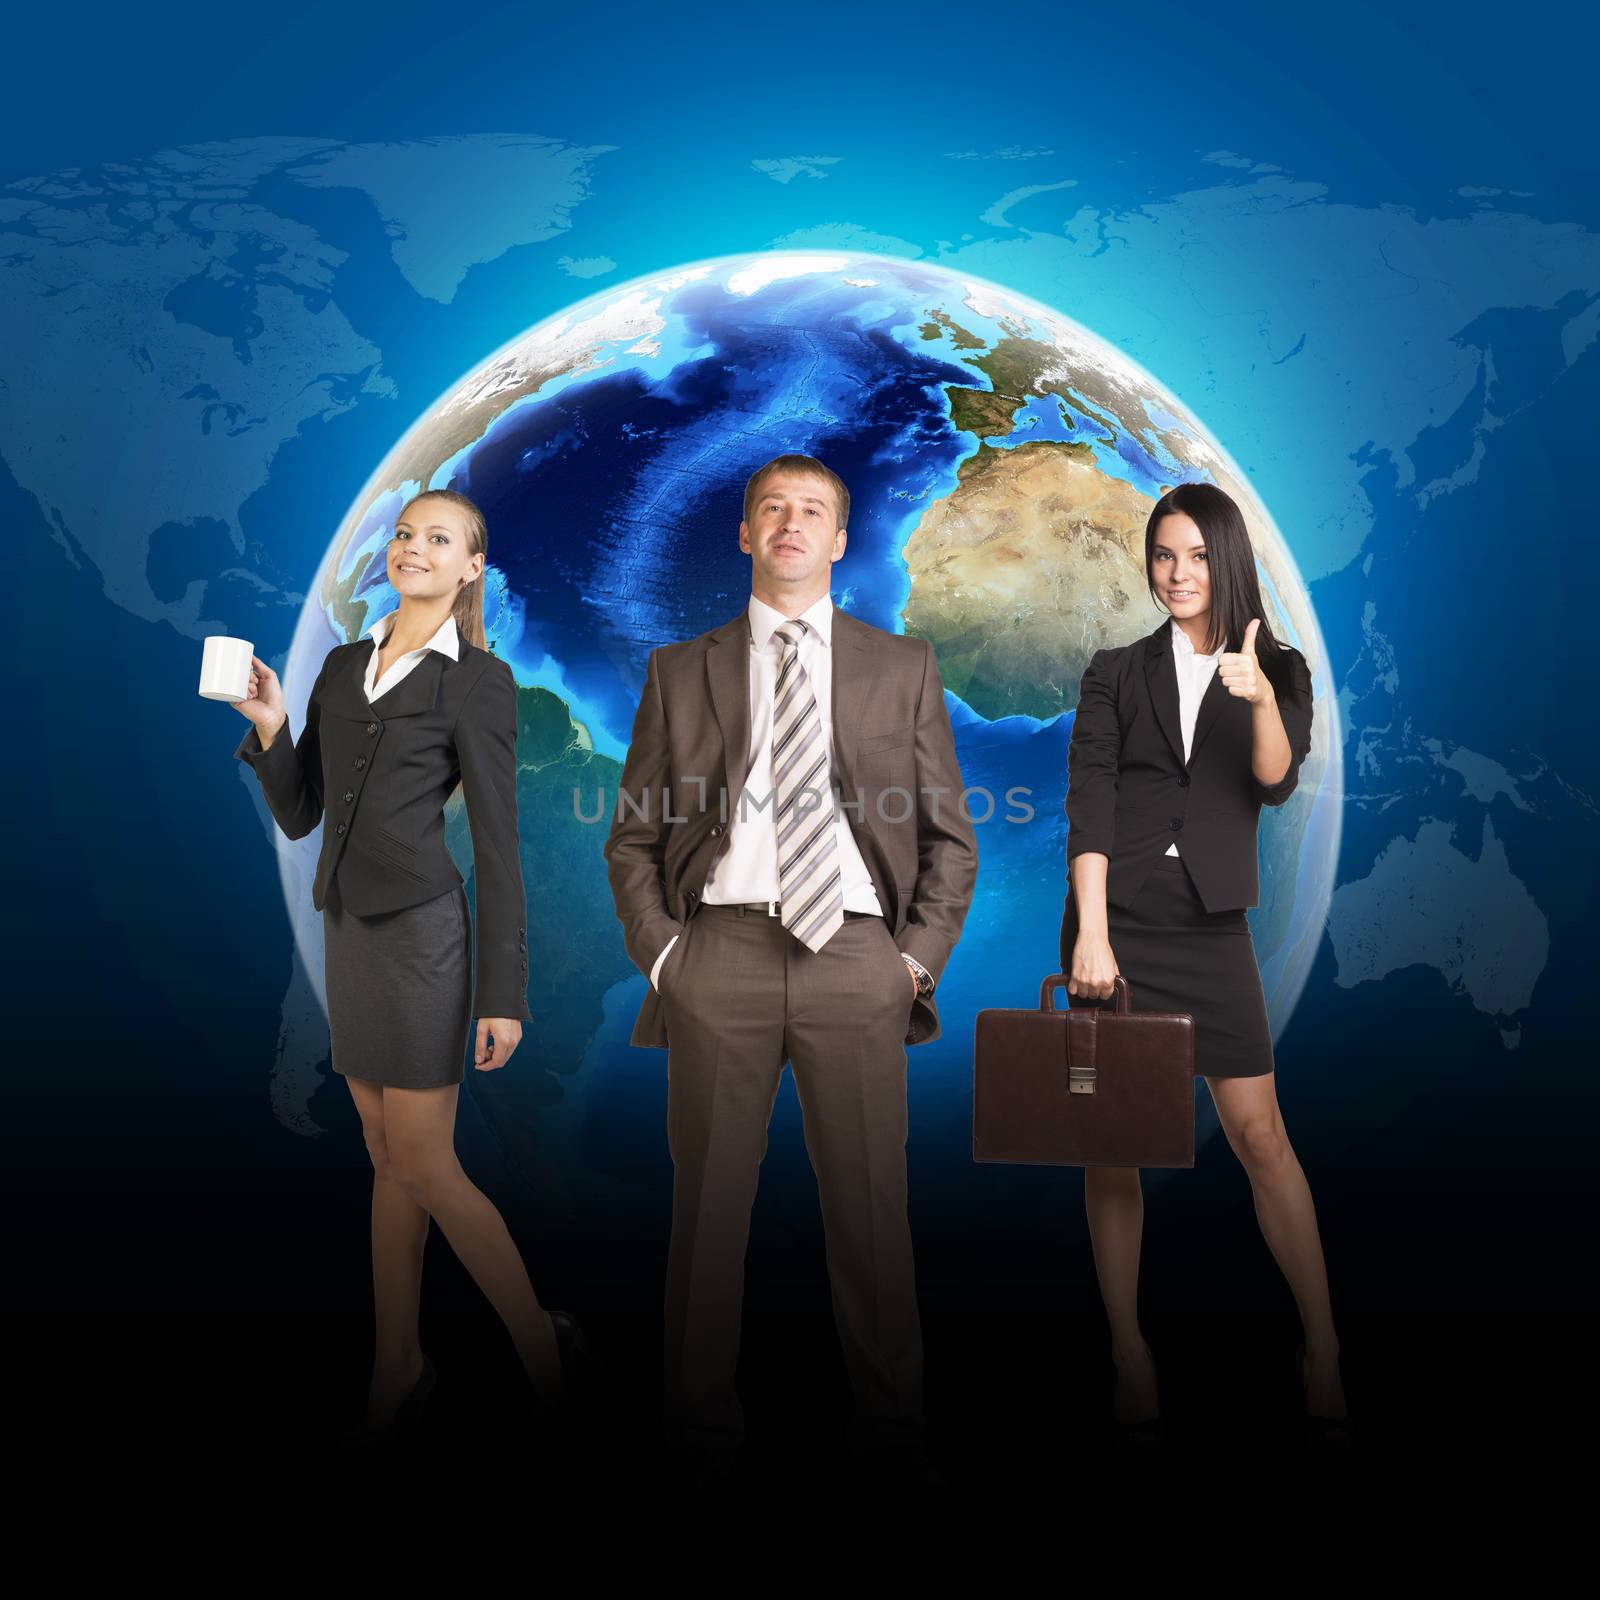 Business people in suits standing on background of Earth. World map on dark background. Elements of this image furnished by NASA